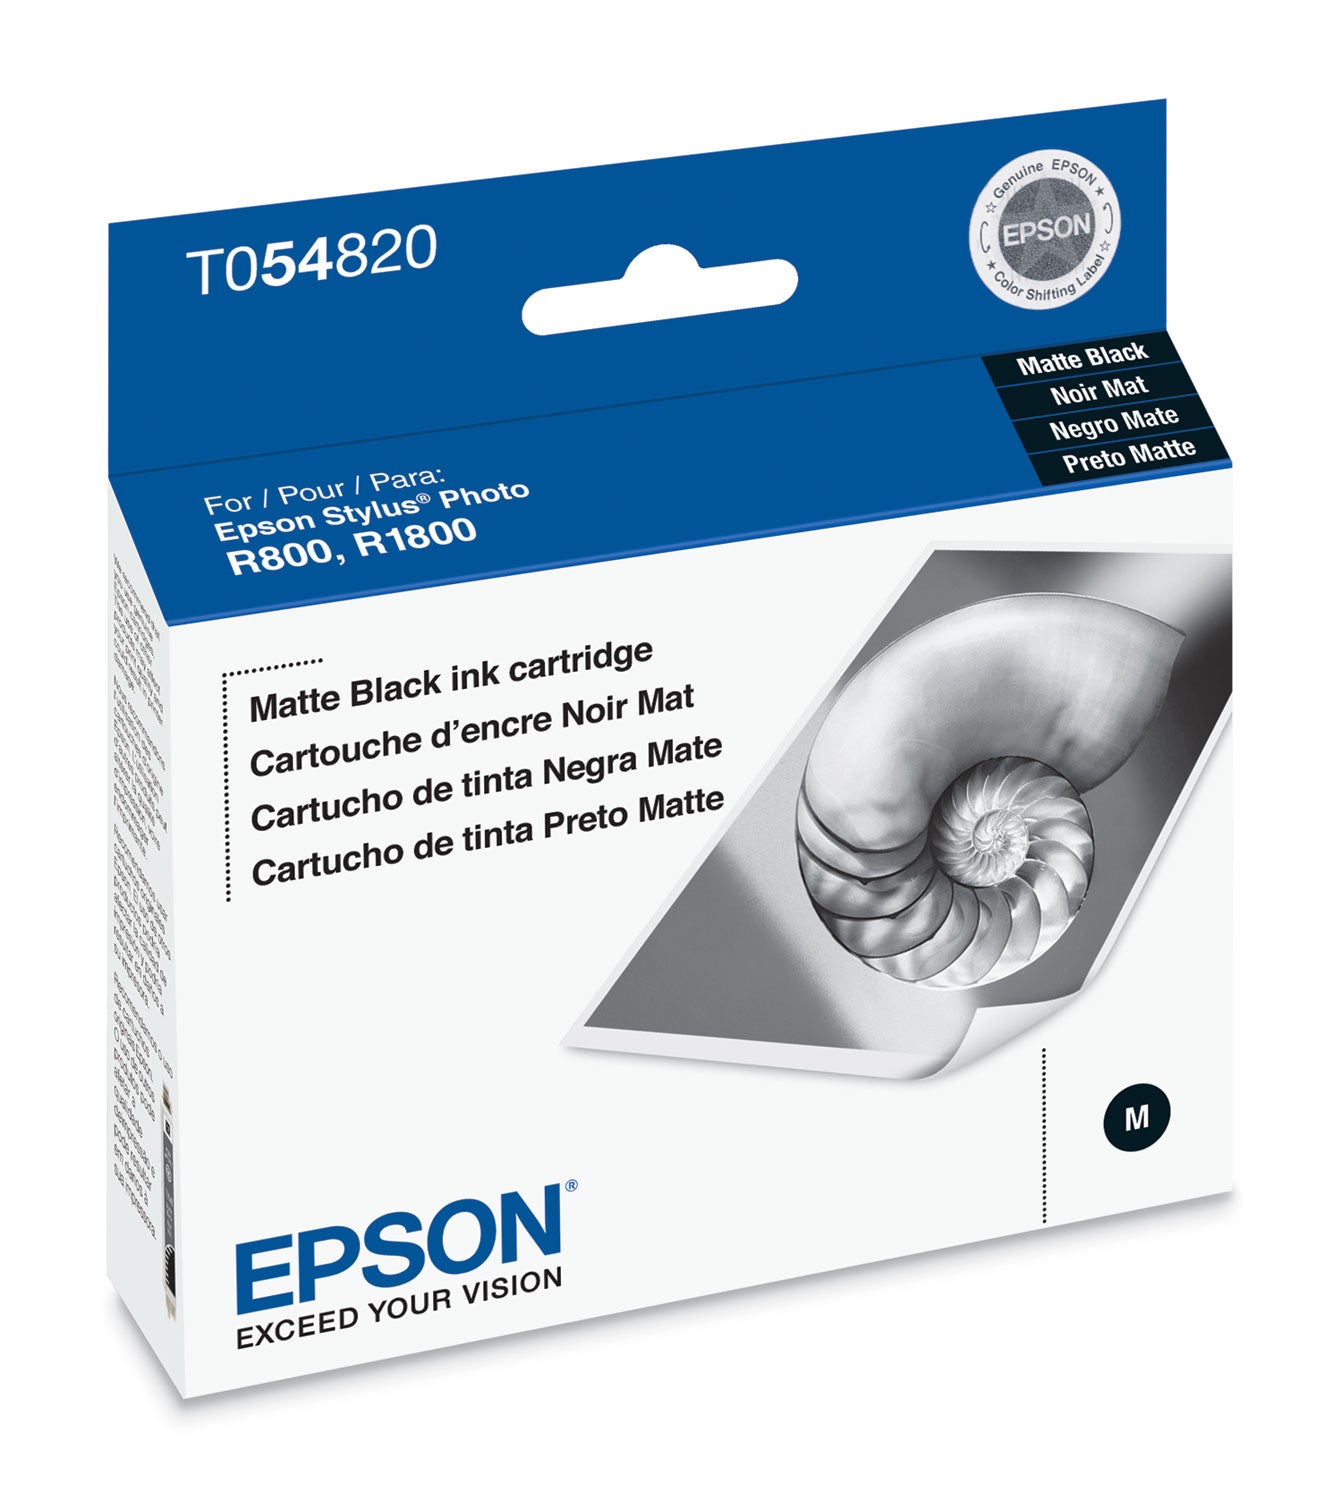 Epson T054820 R800/R1800 Matte Black Ink, printers ink small format, Epson - Pictureline  - 1